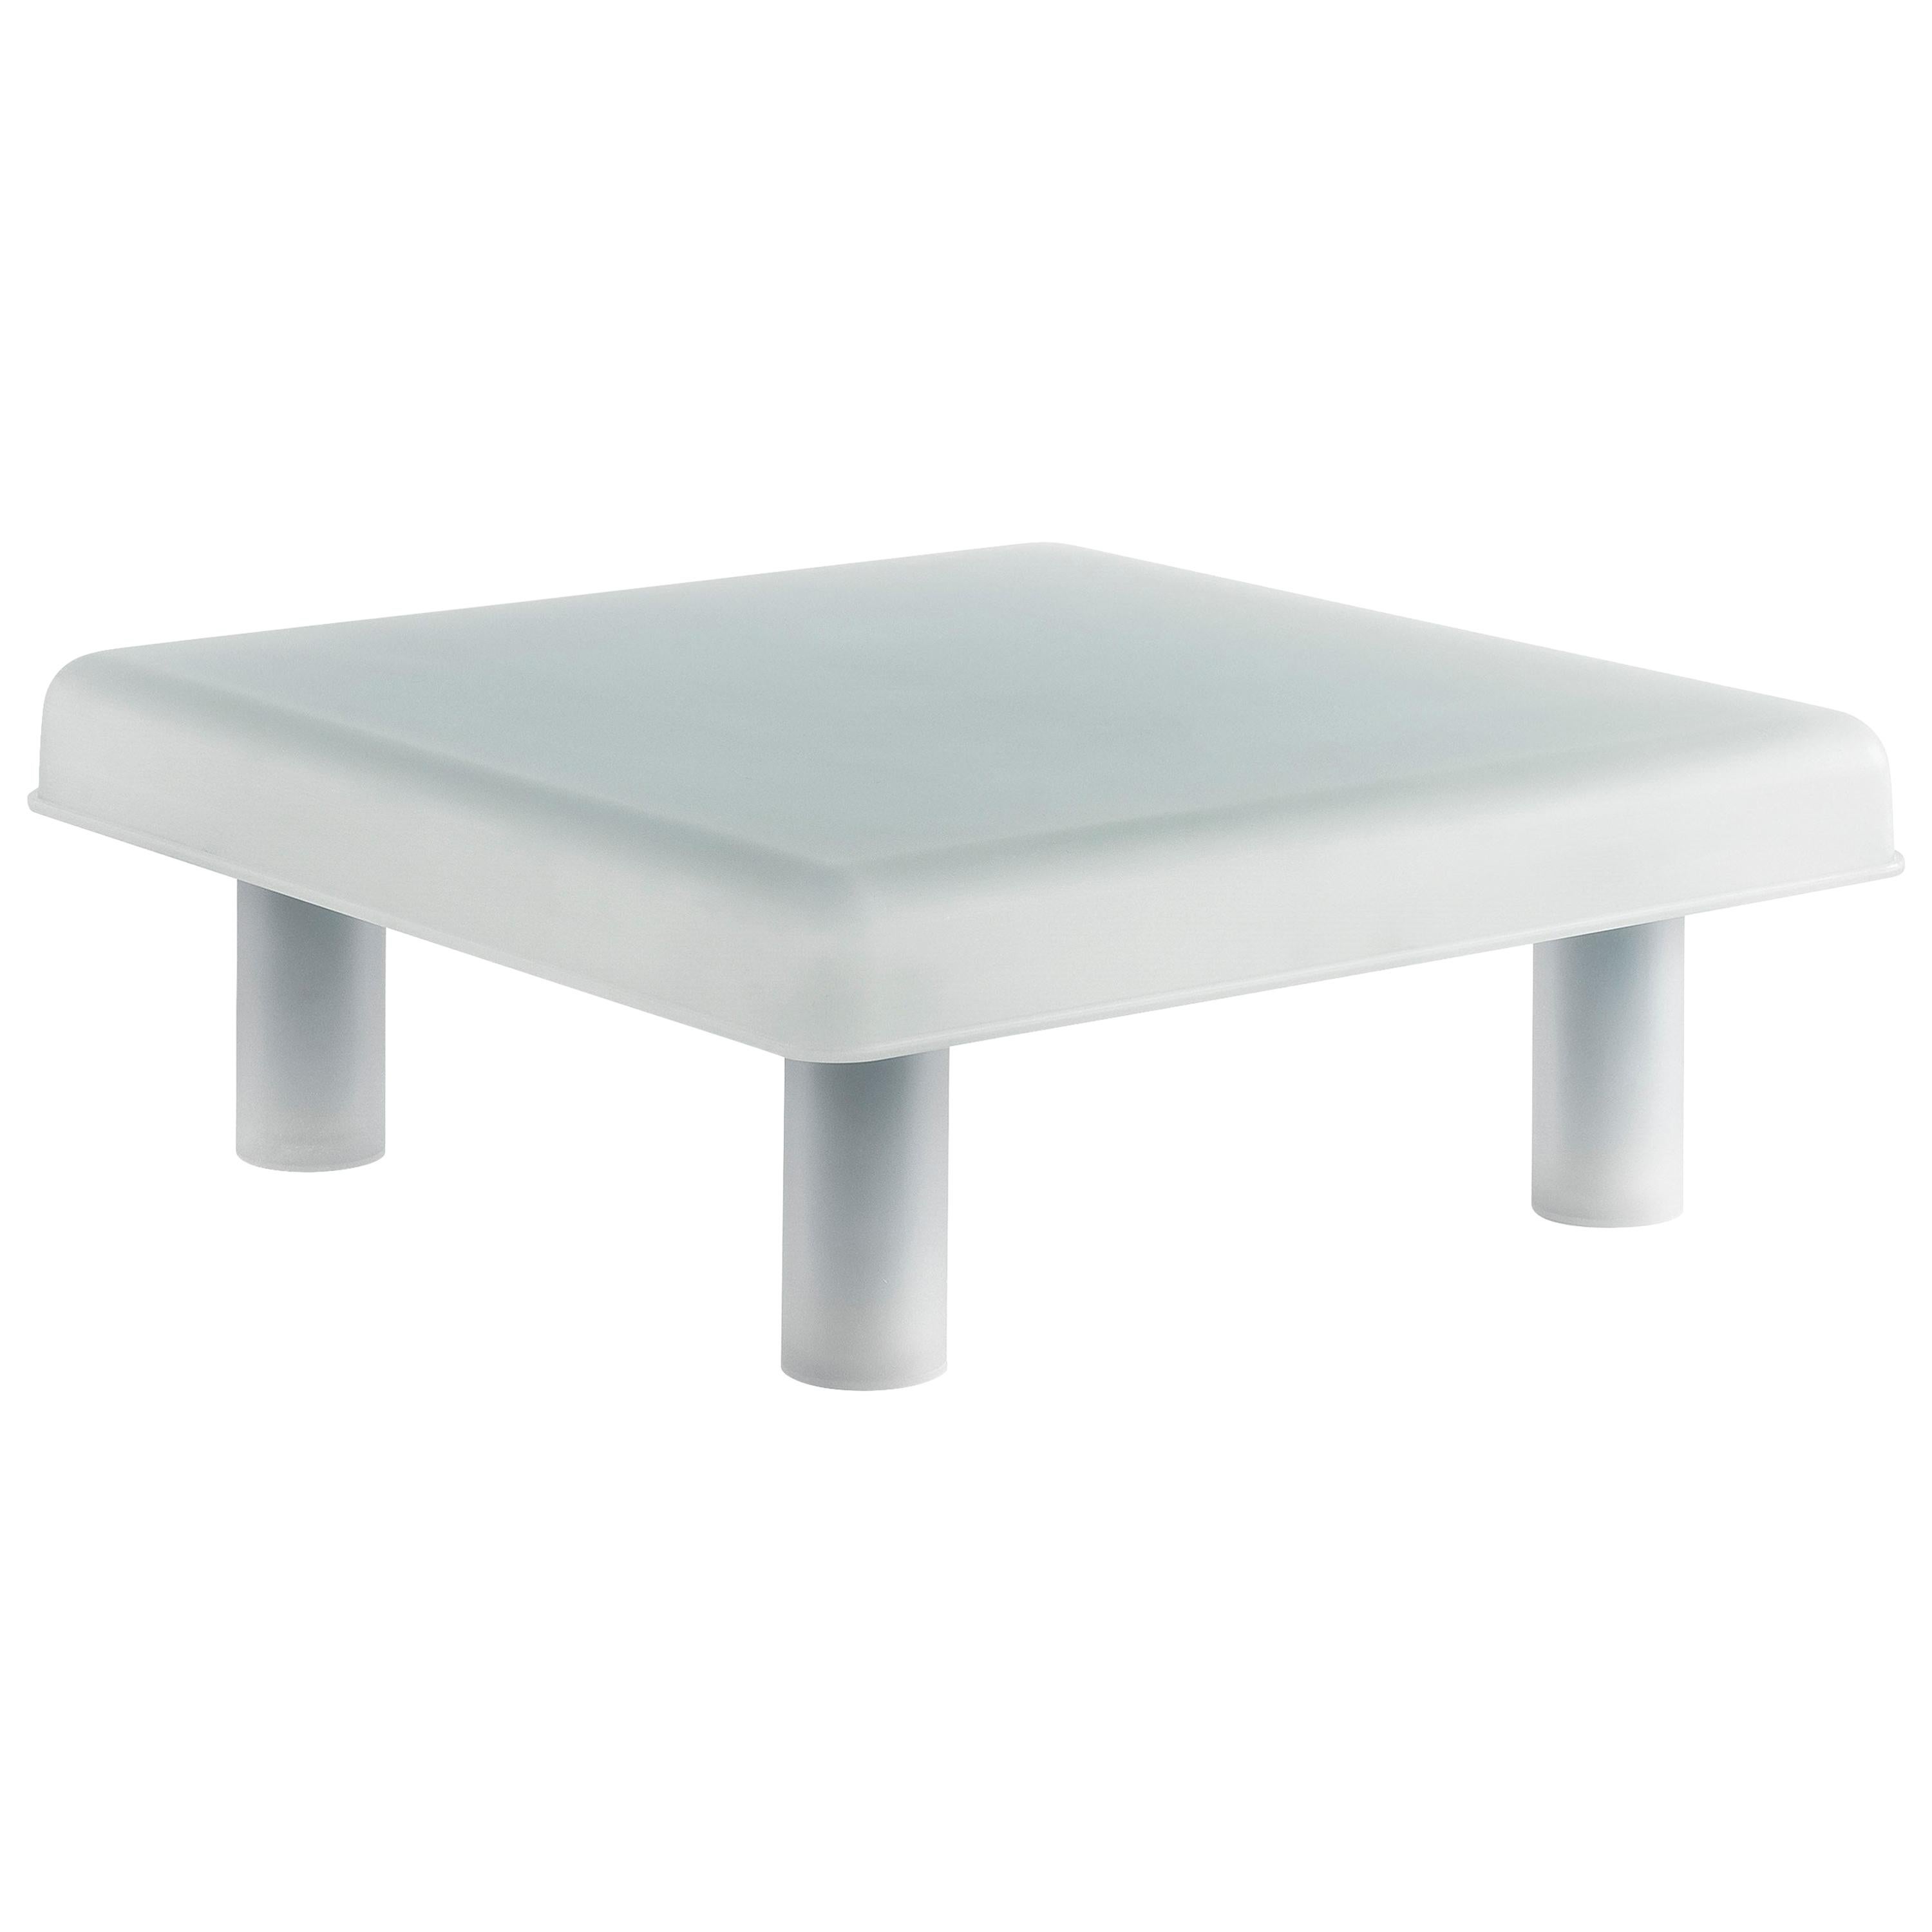 For Sale: Blue (Mint) 21st Century Sopovria So Central Table in Frosted Plexiglass by Sovrappensiero